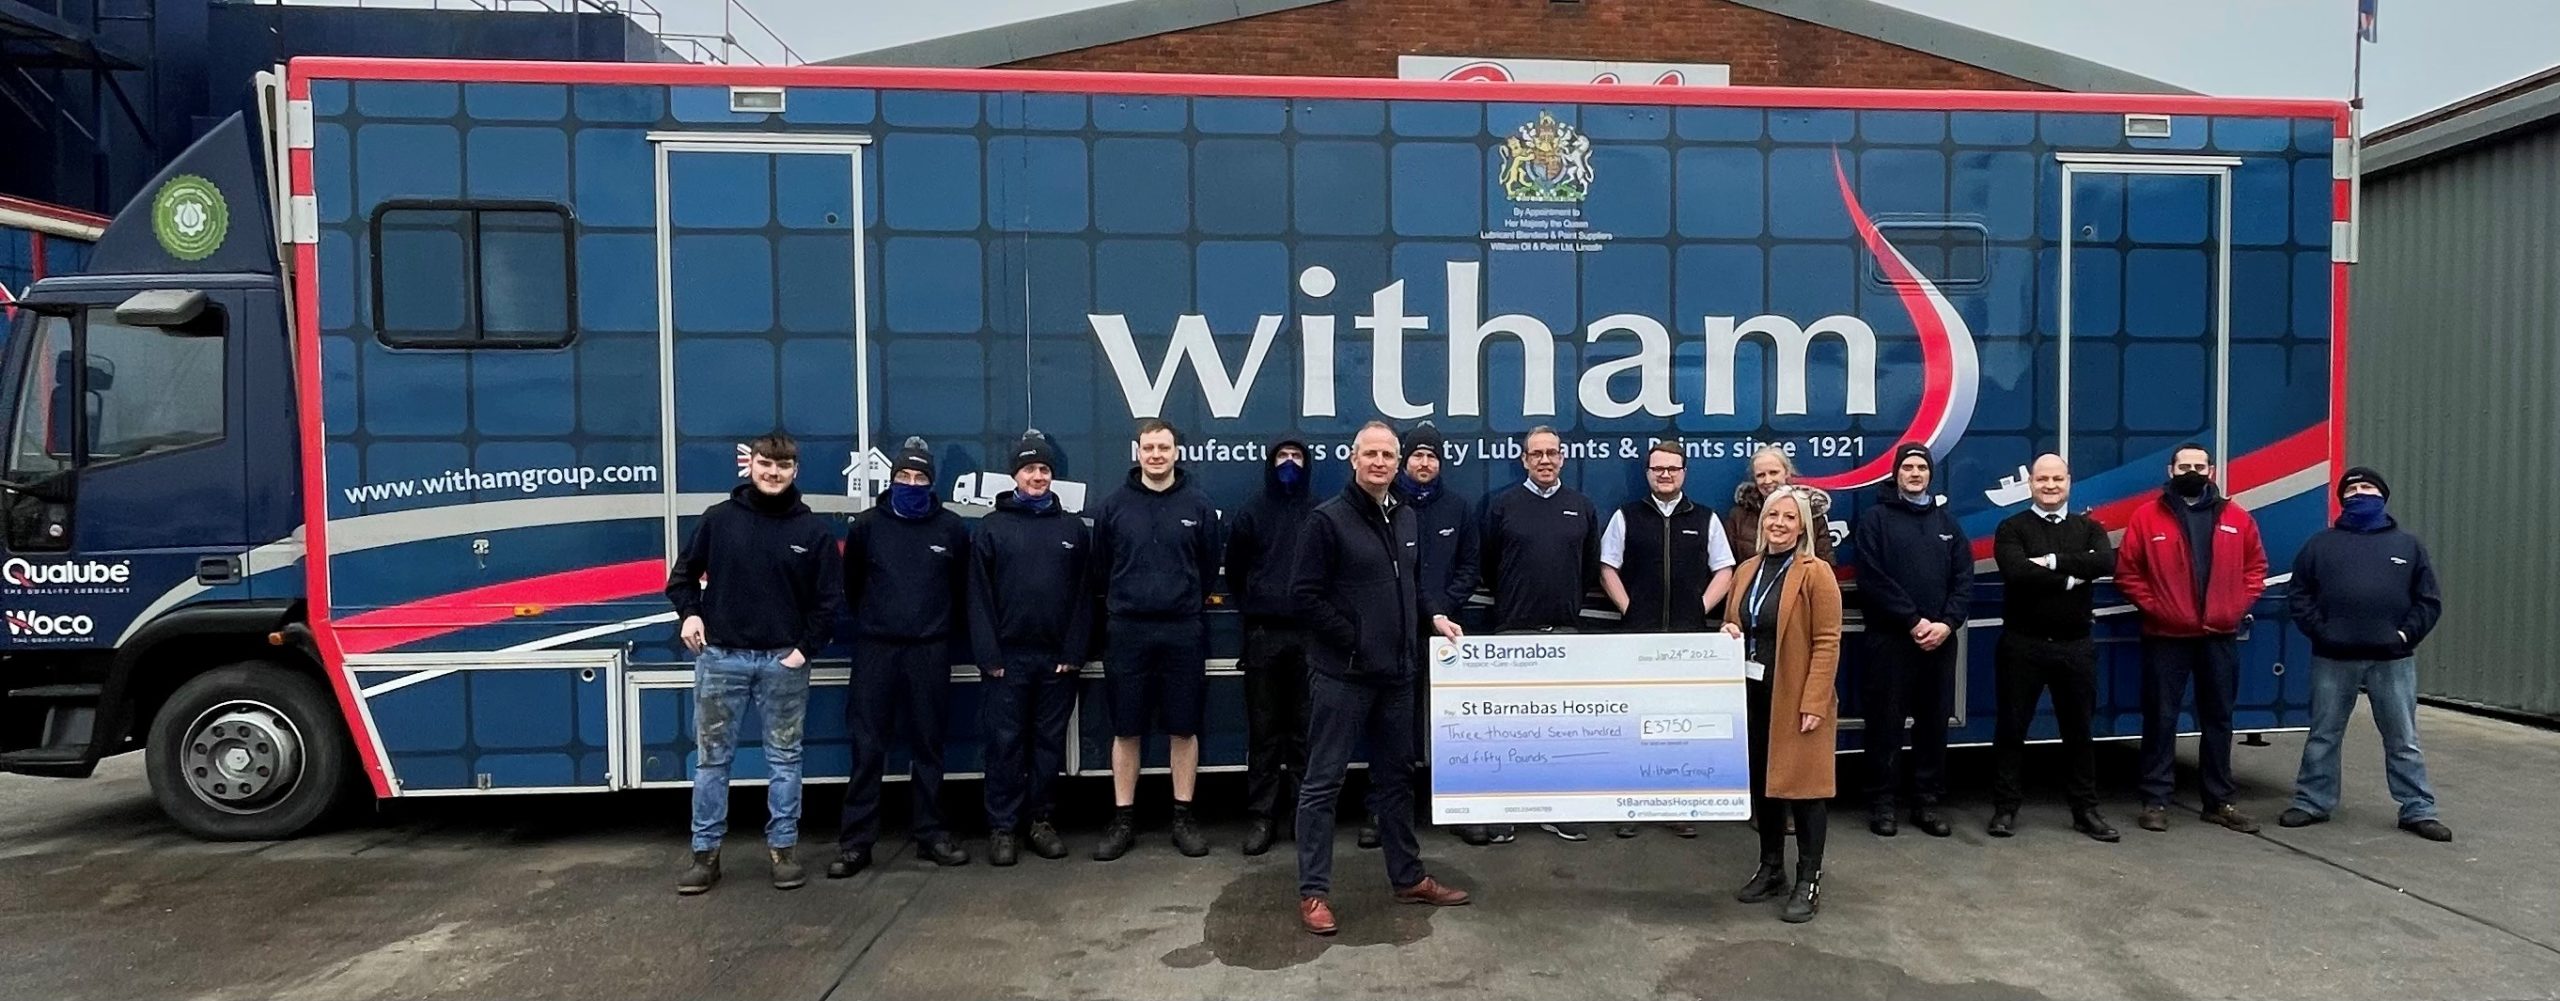 Group of men and a woman in front of lorry with Witham Group branding, holding a large cheque for St Barnabas Hospice charity